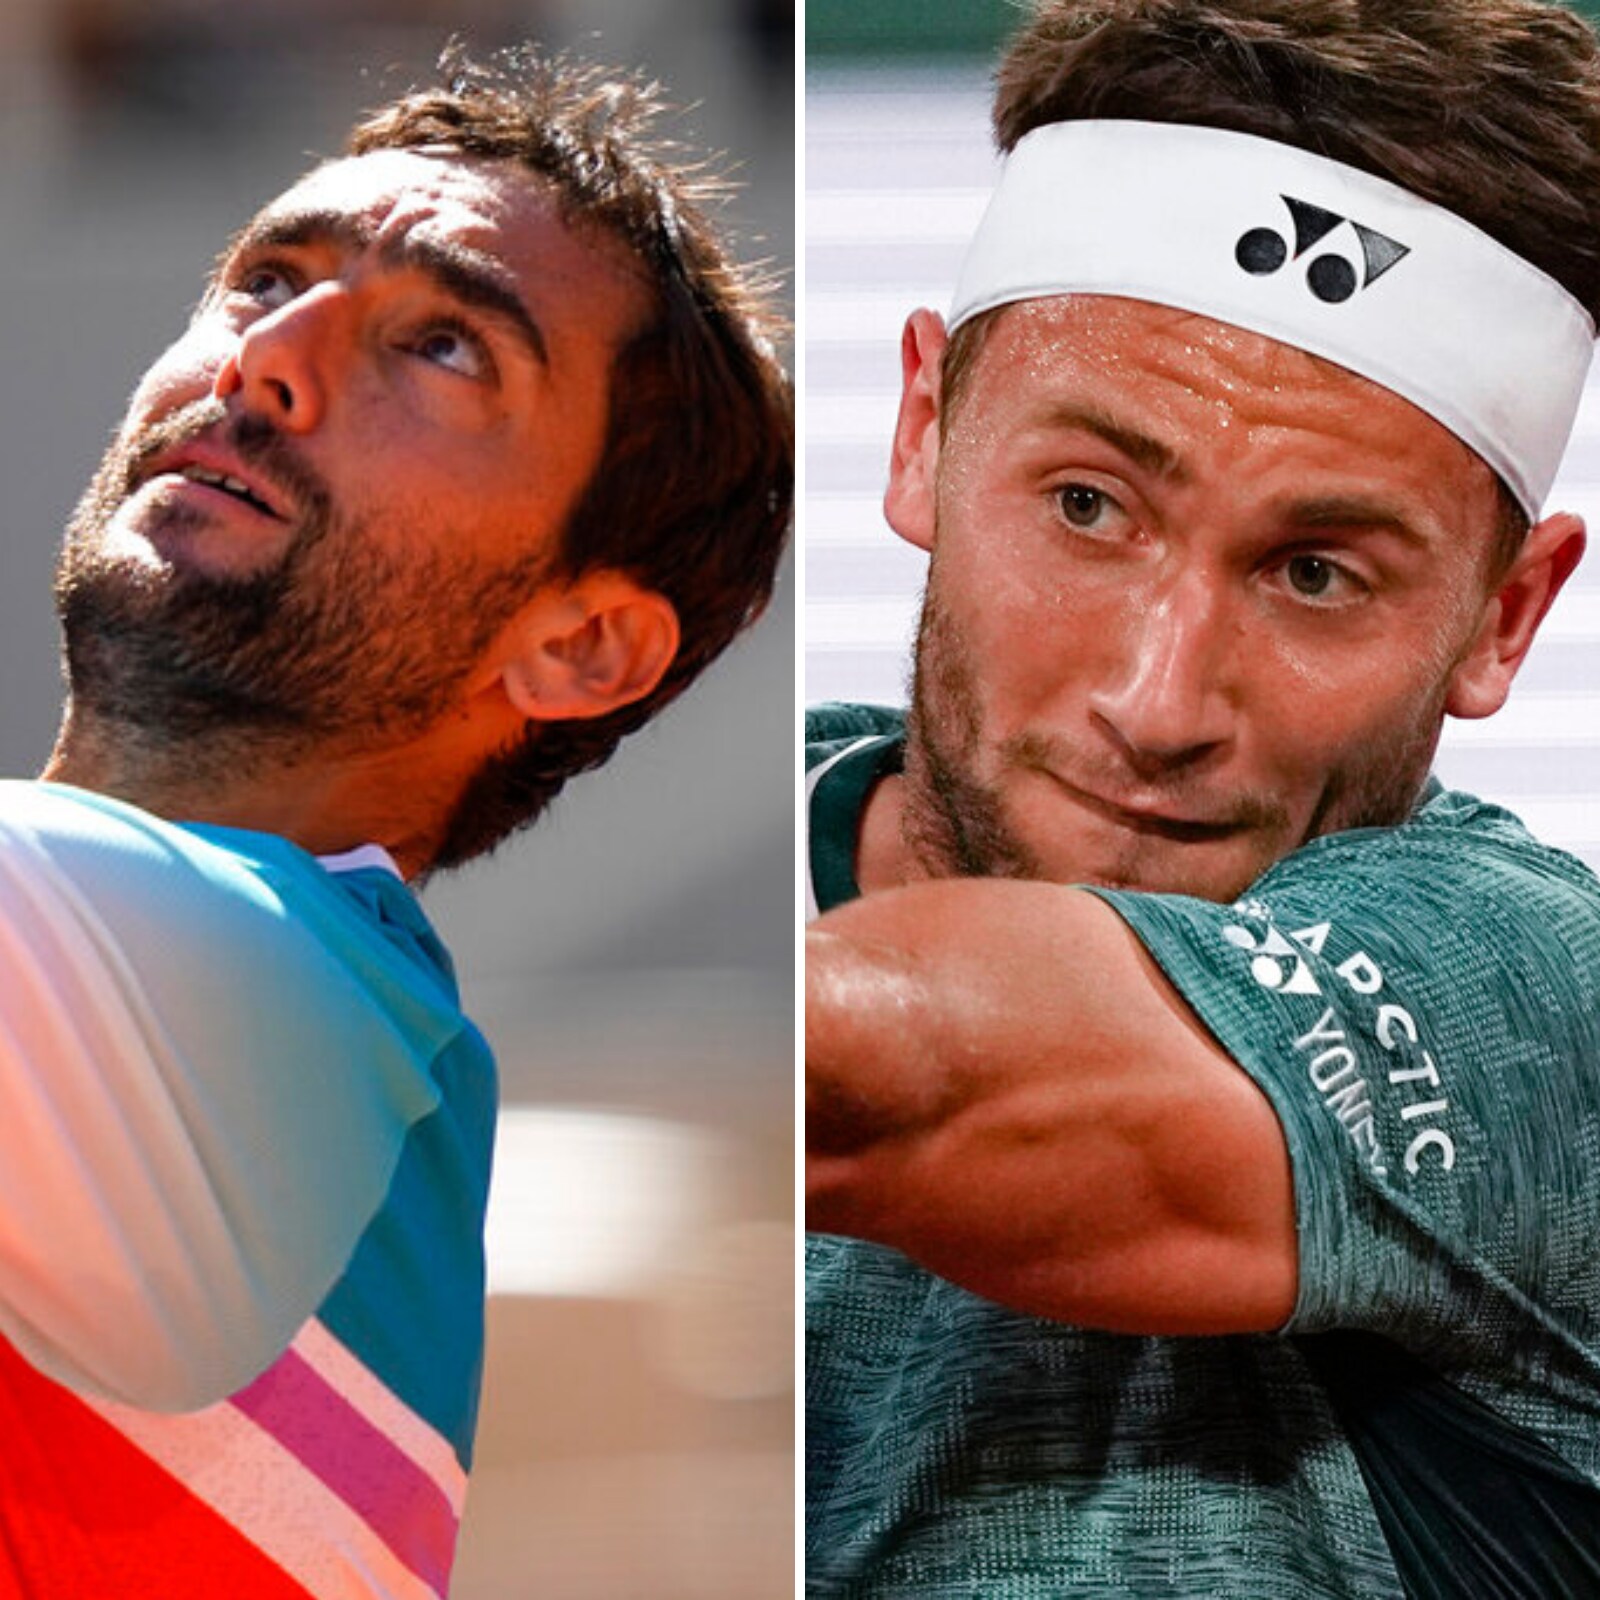 Marin Cilic and Casper Ruud Reach French Open Semi-finals for First Time